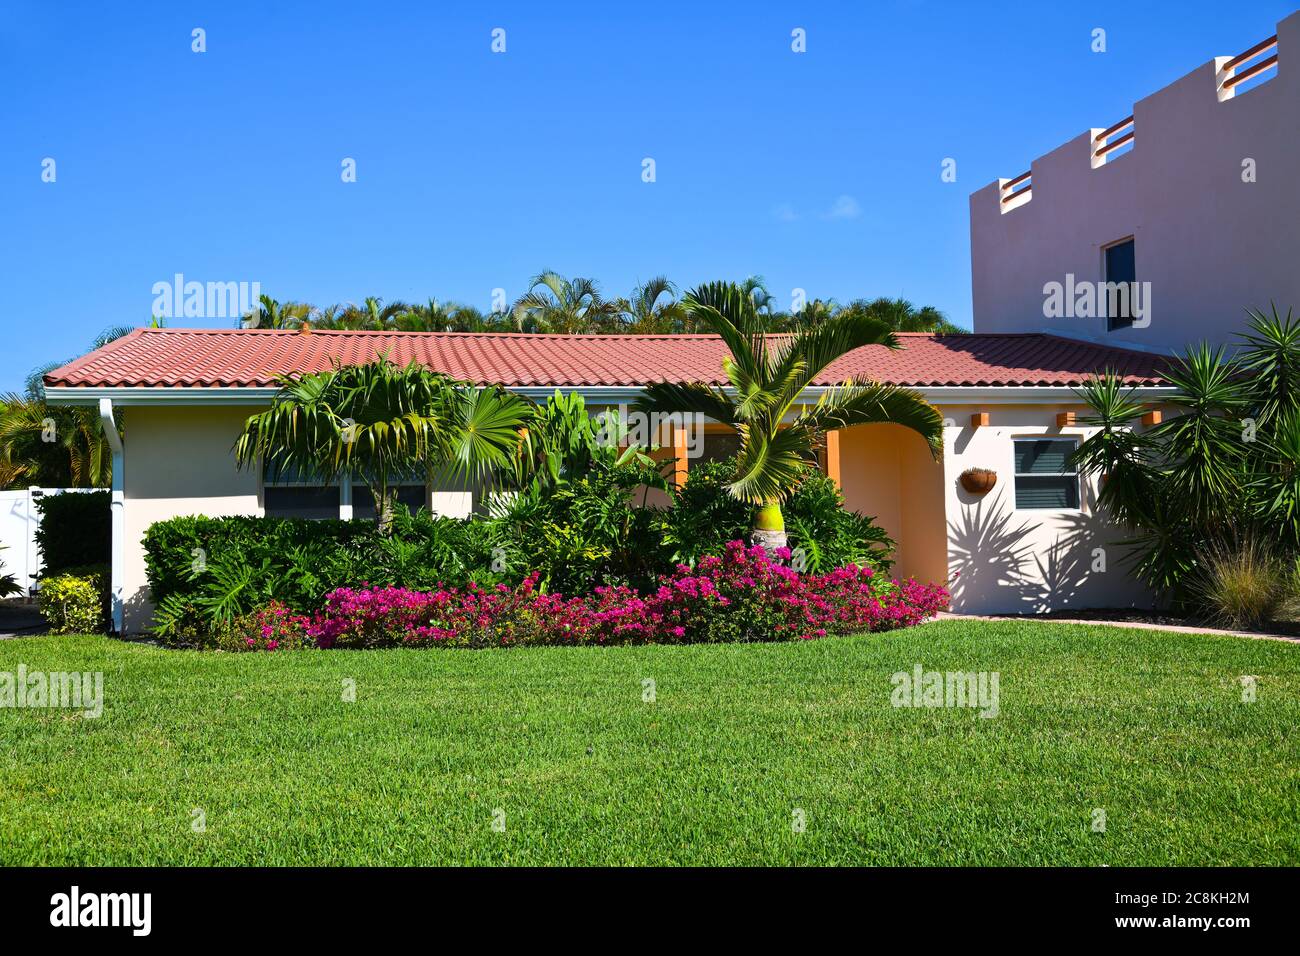 A Beautiful Florida House Near the Beach for Rent or Sale. Make a Great Rental Property Stock Photo